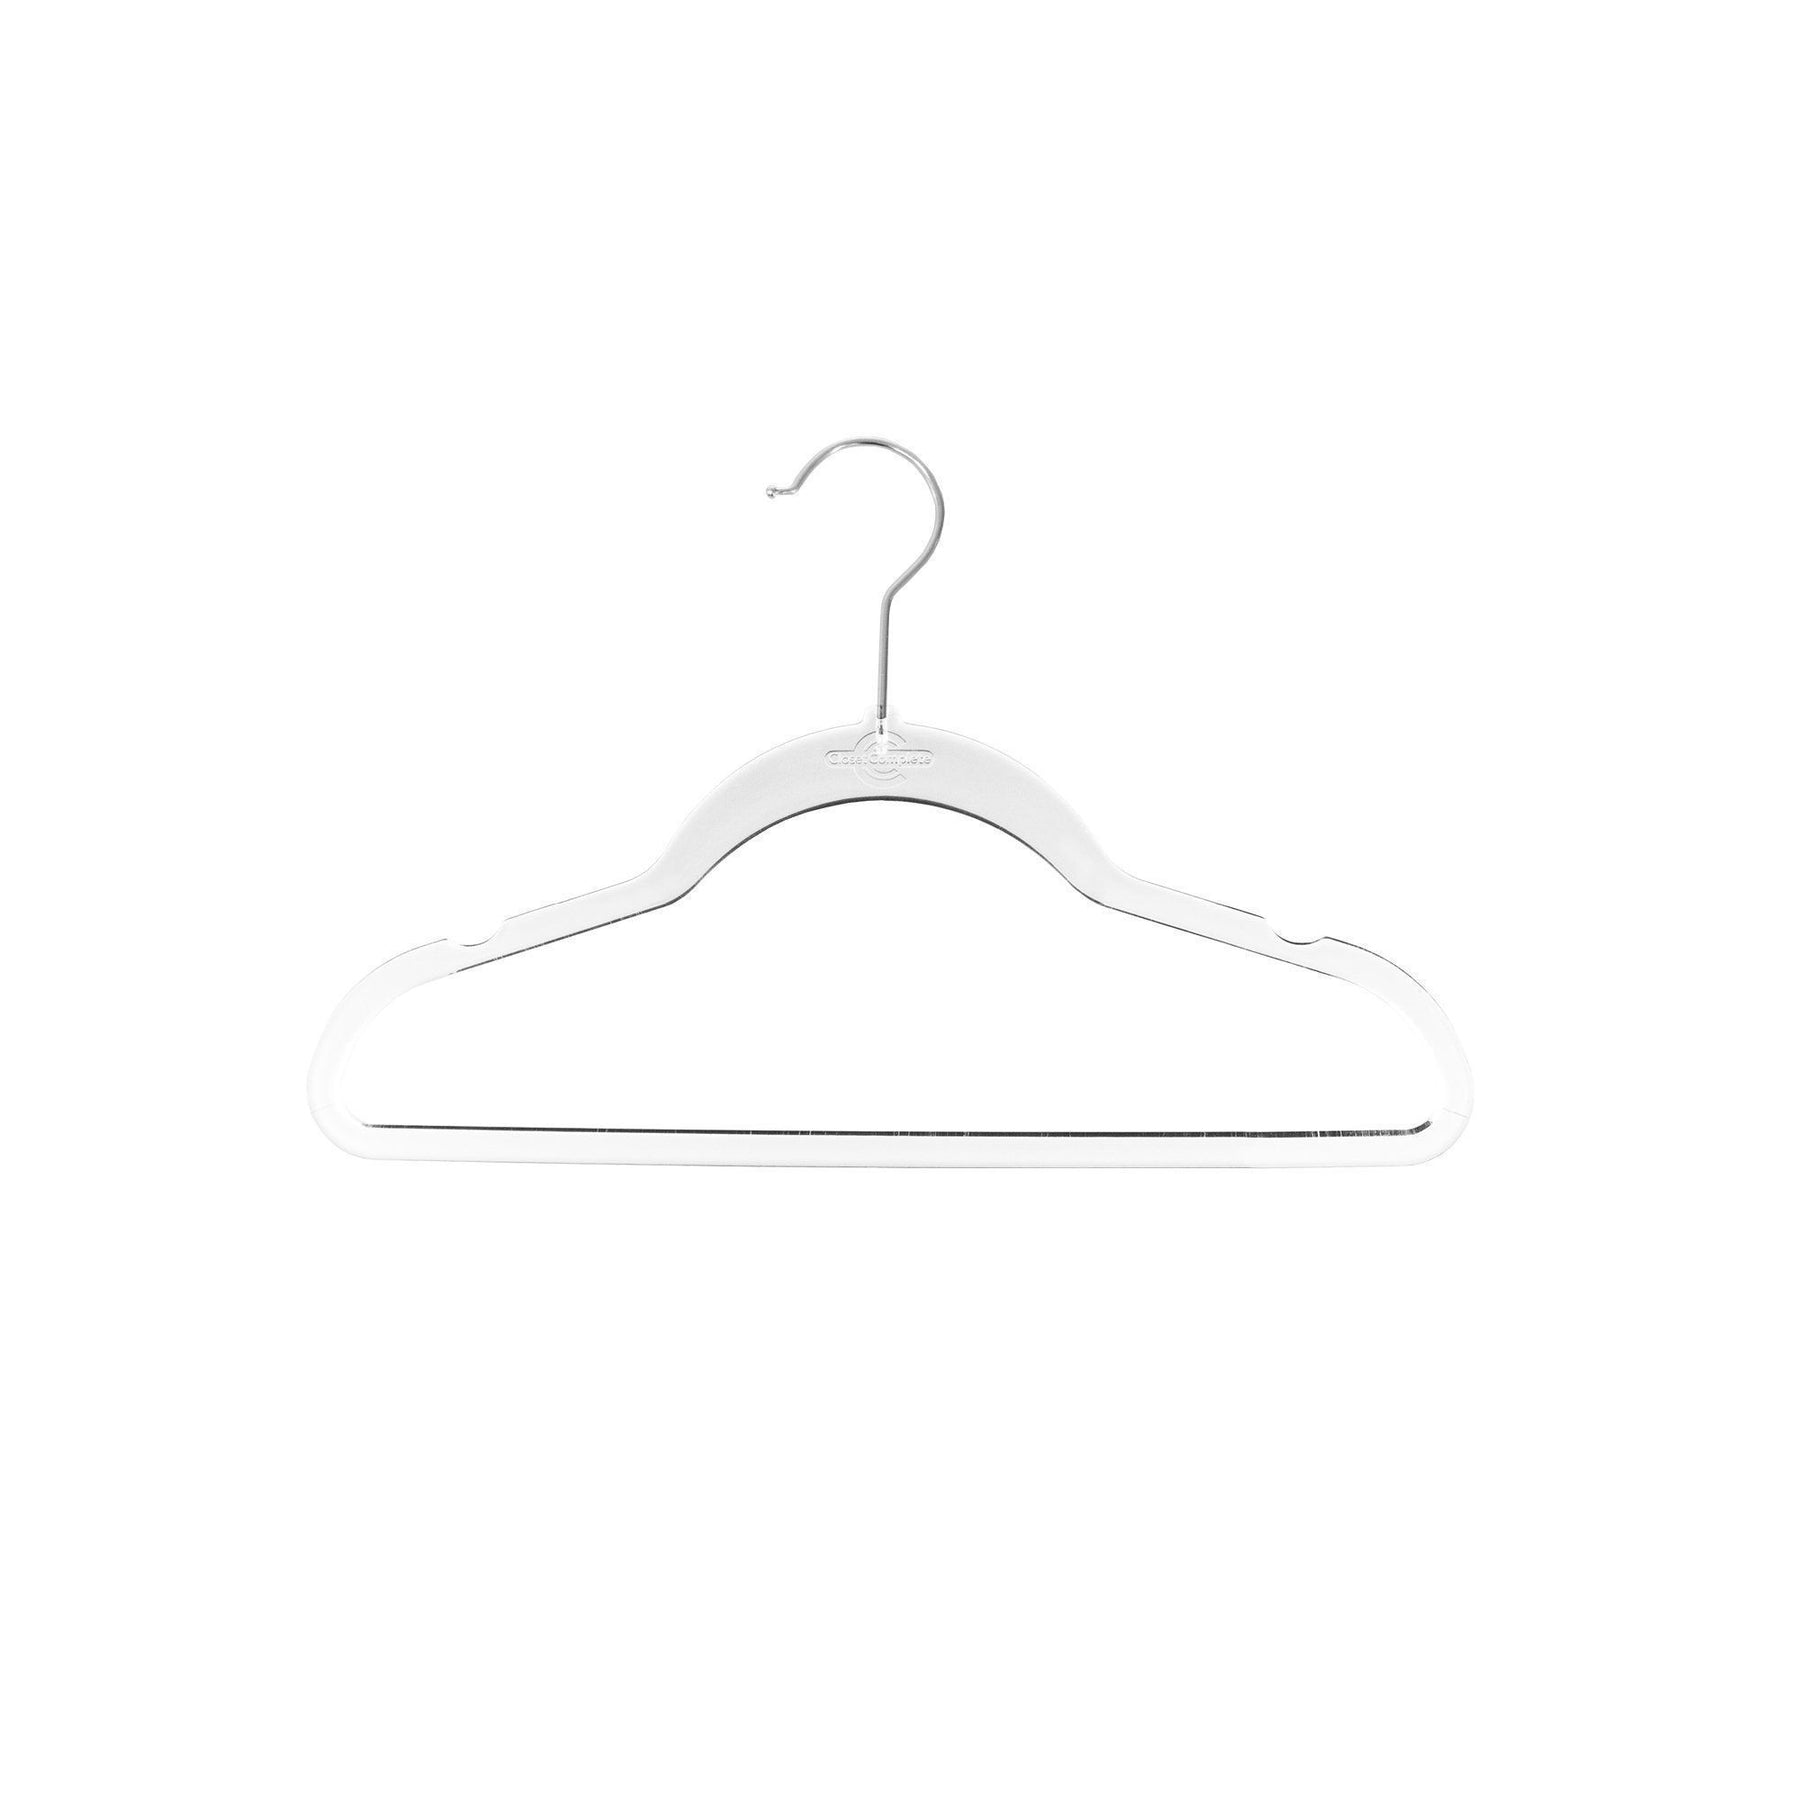 https://cdn.shopify.com/s/files/1/2993/5404/products/closet-complete-acrylic-hangers-kids-baby-sized-completely-clear-acrylic-hangers-69190-7162248429653_1800x1800.jpg?v=1552520336